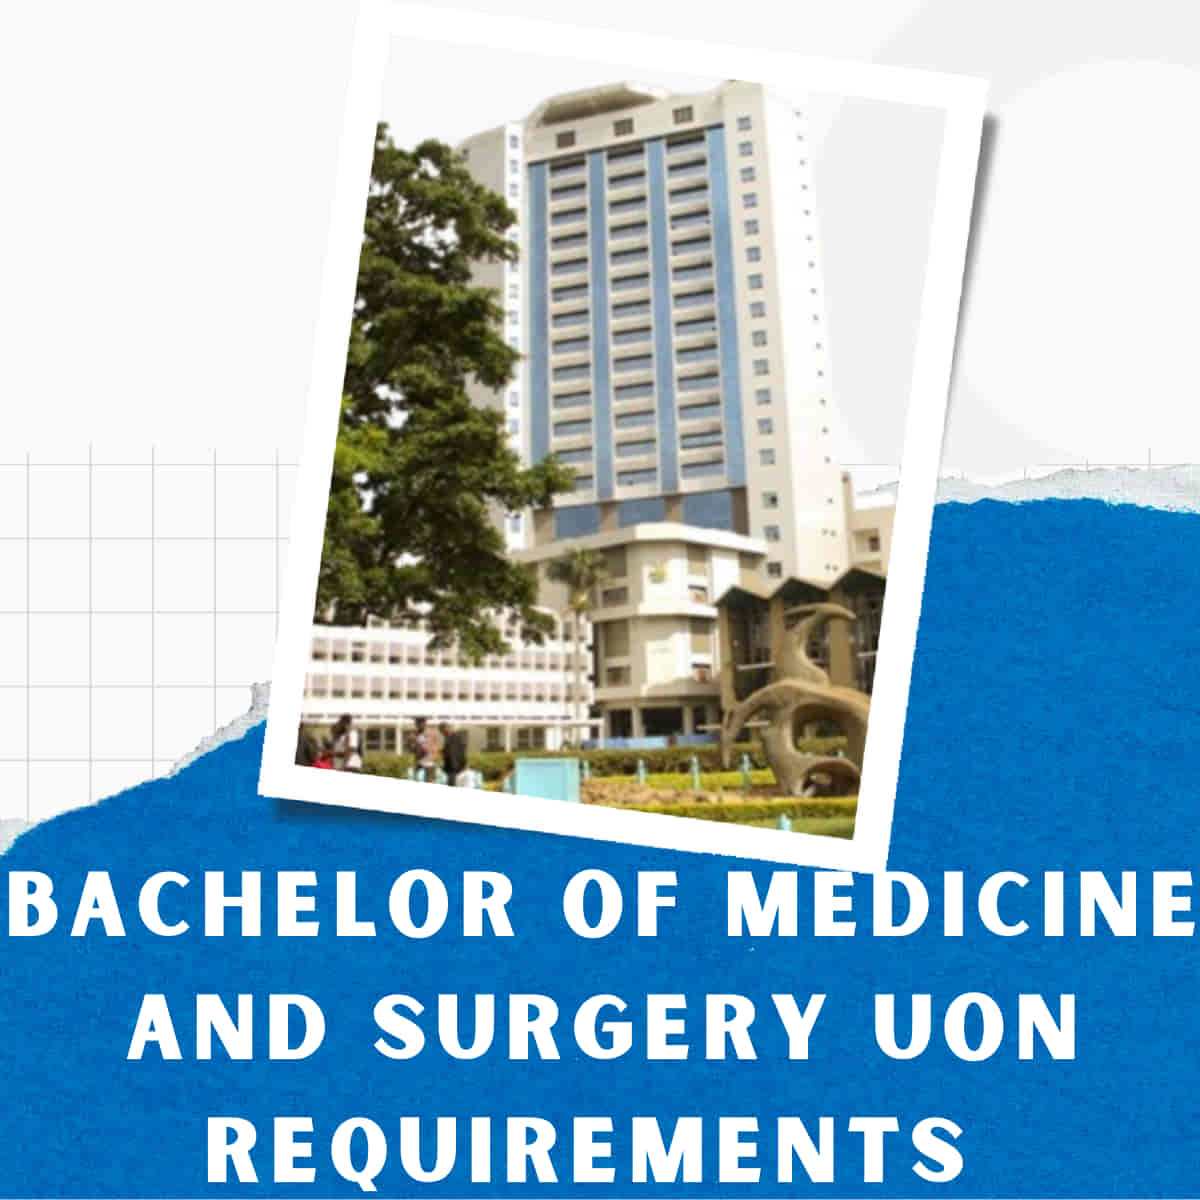 Bachelor of Medicine and Surgery UON requirements